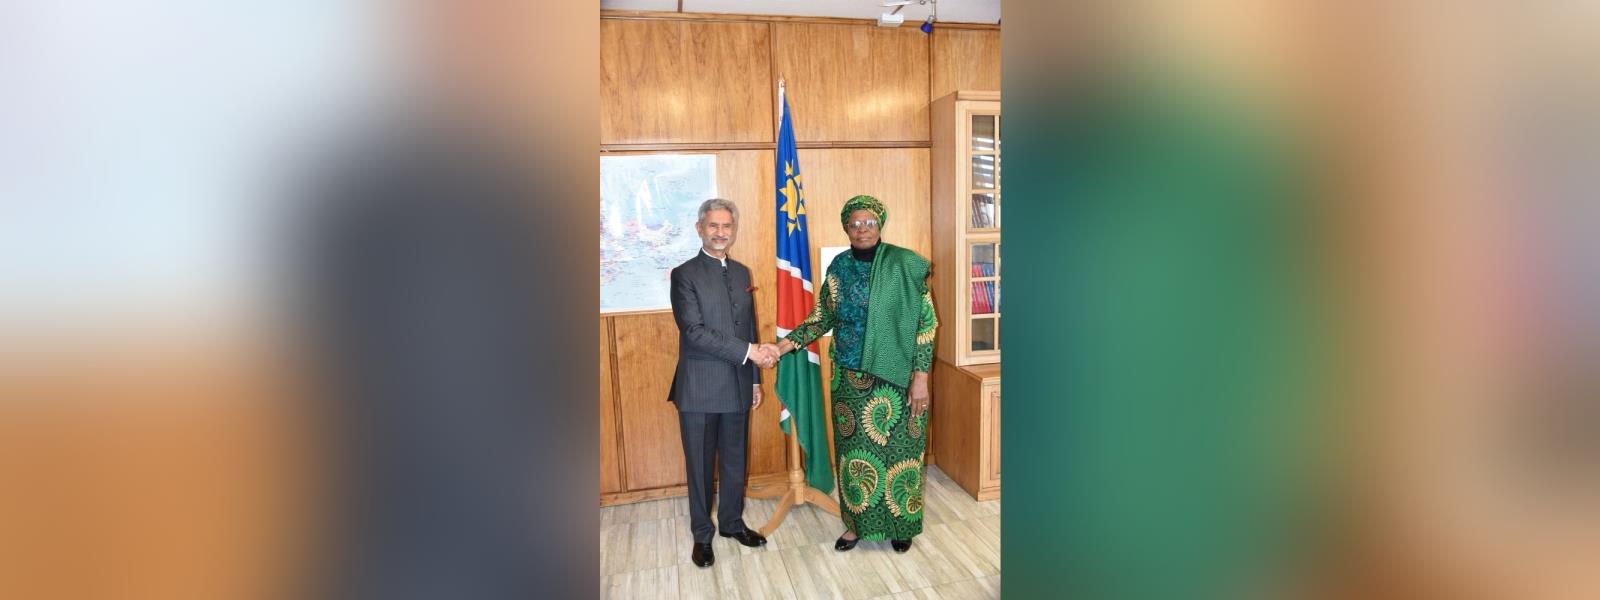 External Affairs Minister Dr. S. Jaishankar co-chaired the 1st Joint Commission of Cooperation between India and Namibia with H.E. Ms. Netumbo Nandi Ndaitwah, Deputy Prime Minister and Minister of International Relations & Cooperation of Namibia